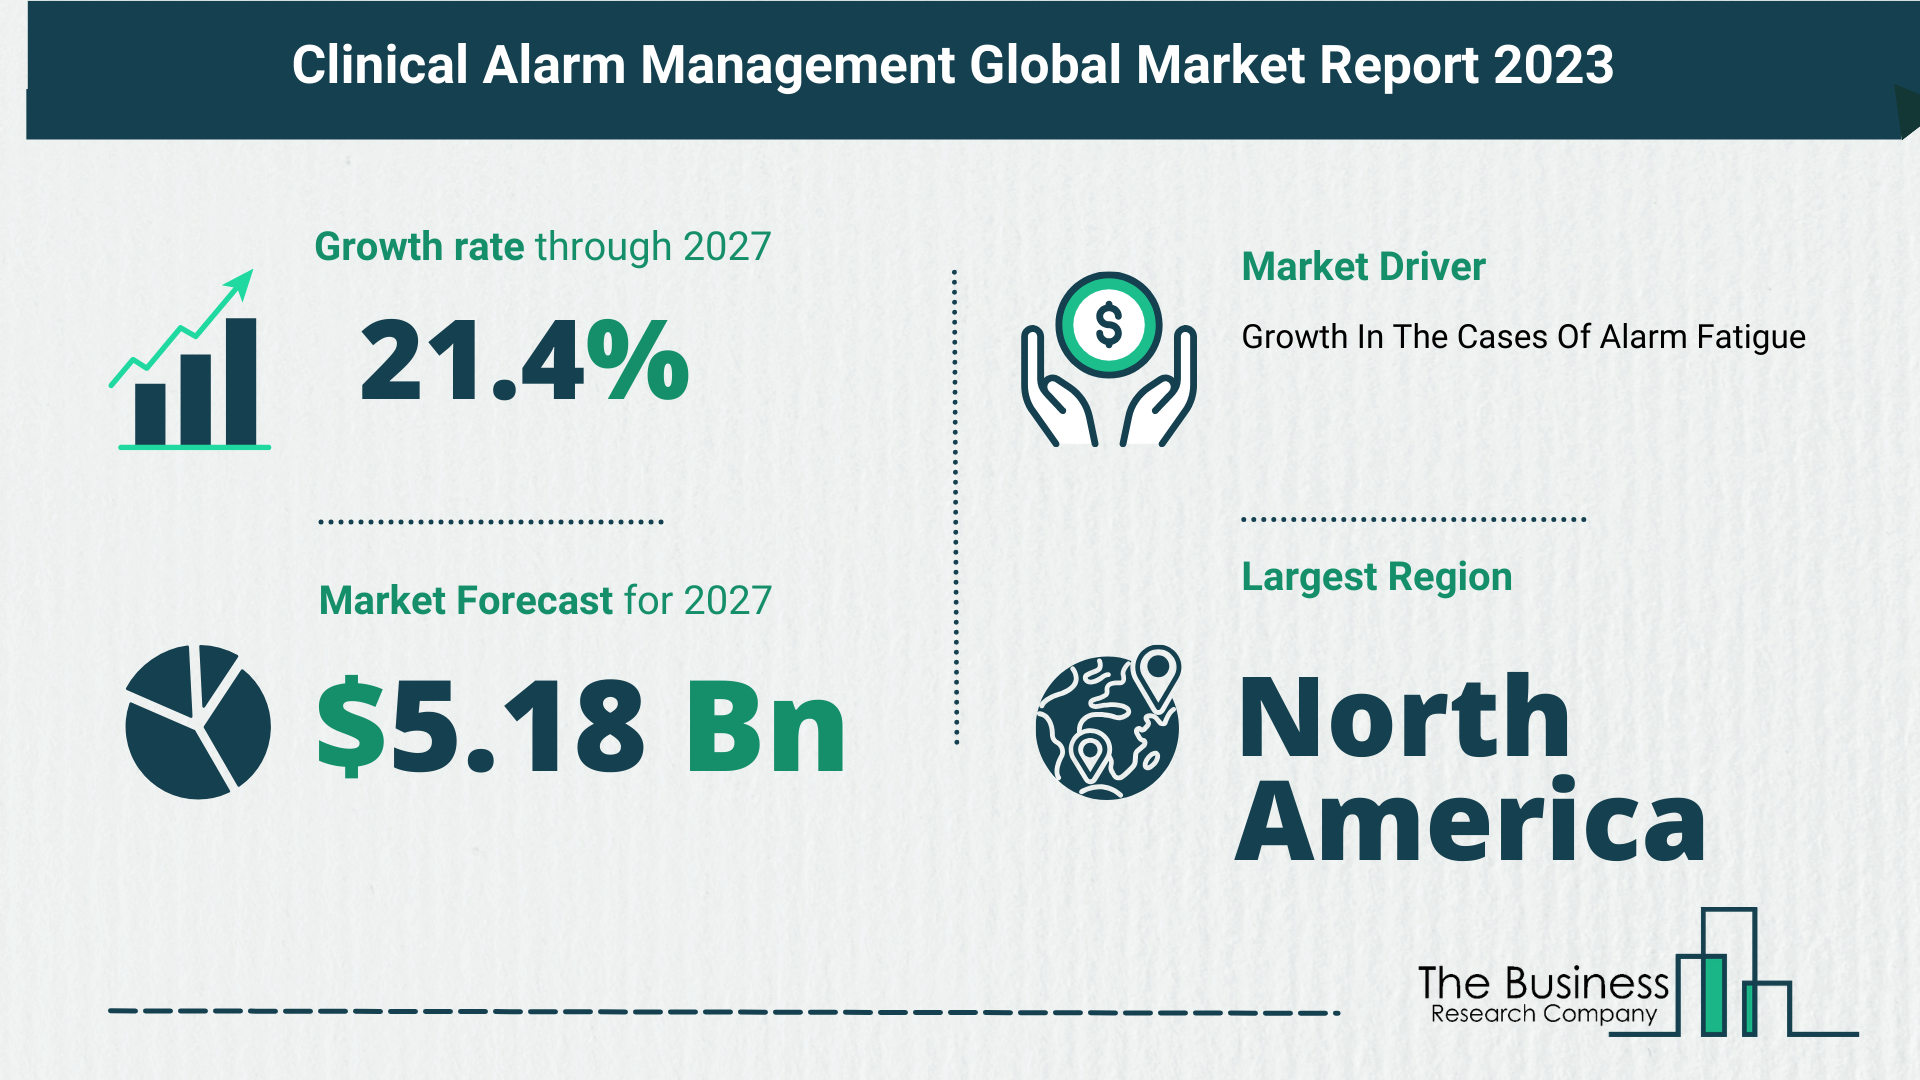 Global Clinical Alarm Management Market Analysis 2023: Size, Share, And Key Trends